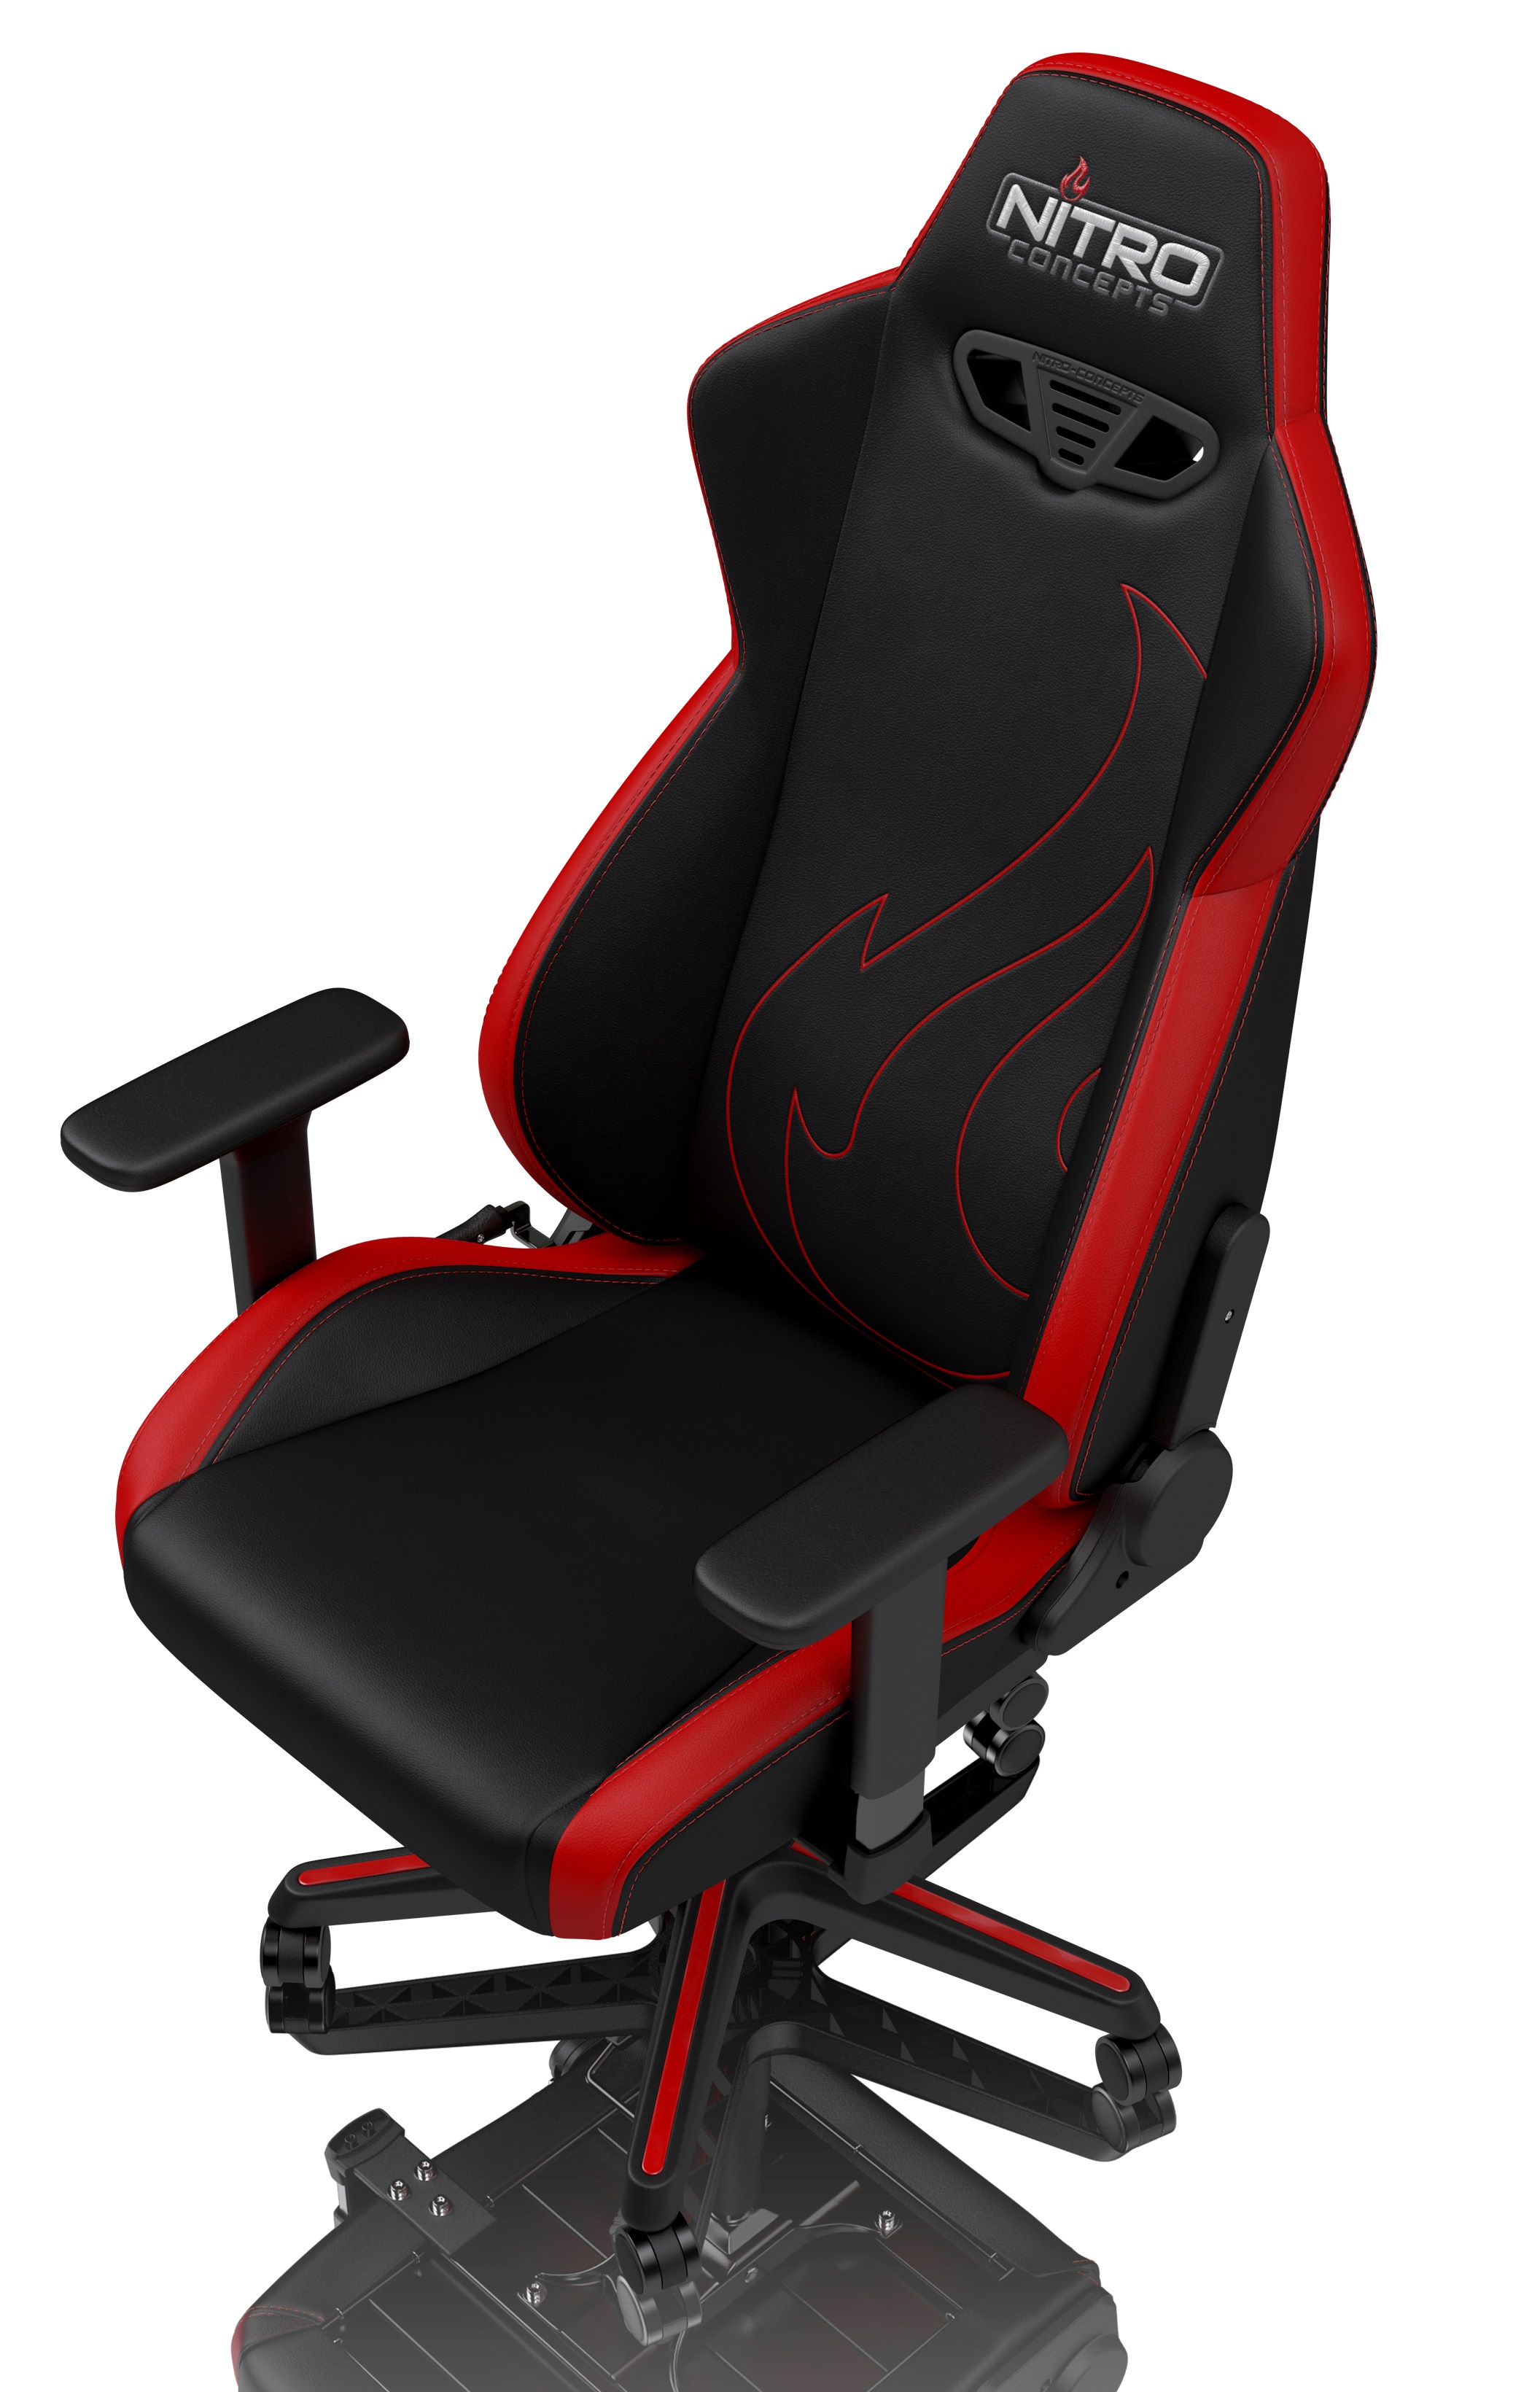 Nitro Concepts - Nitro Concepts S300 EX Gaming Chair - Inferno Red